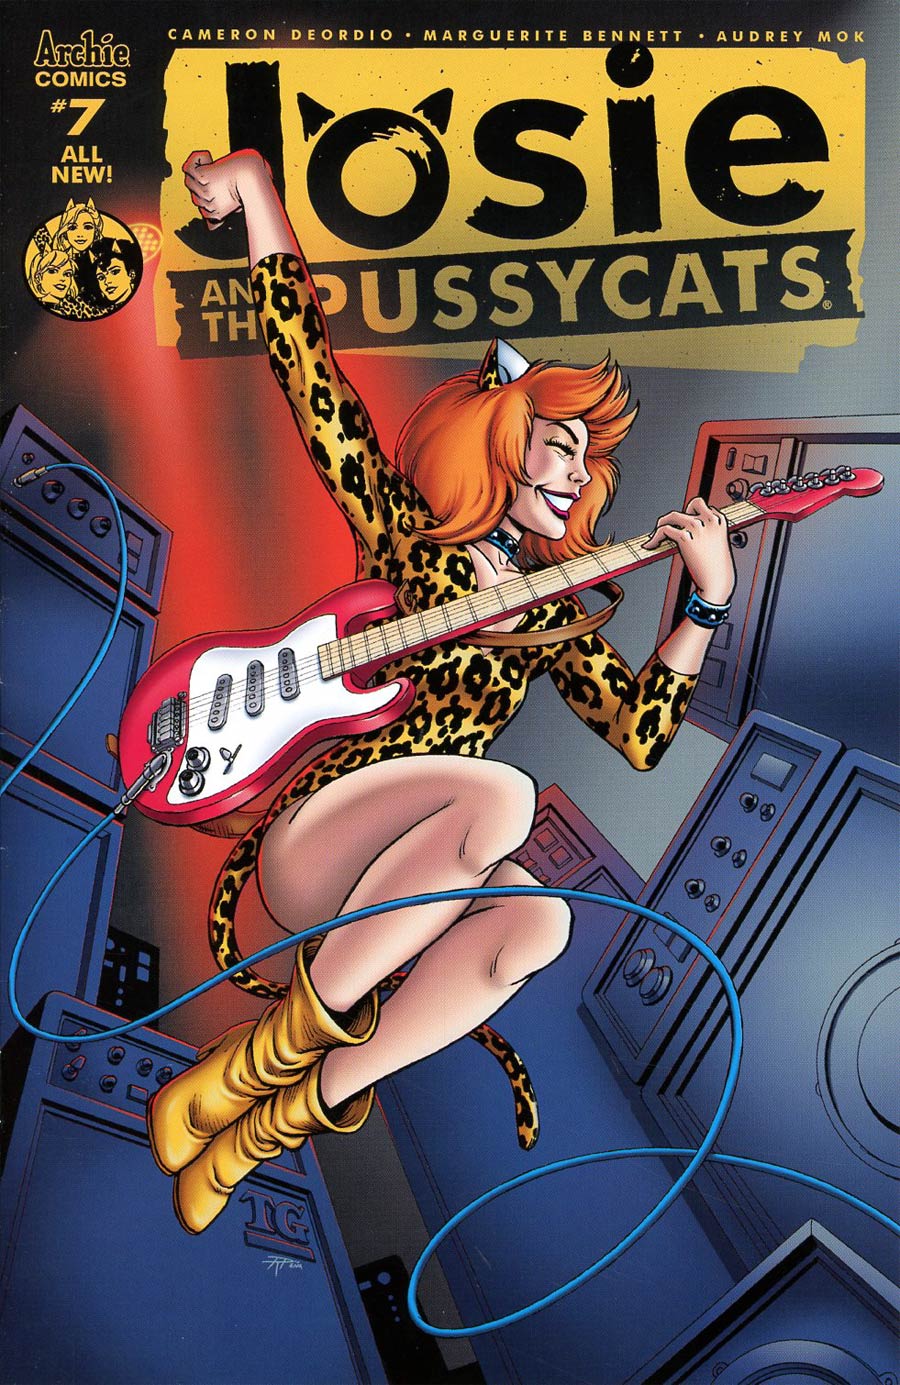 Josie And The Pussycats Vol 2 #7 Cover C Variant Tom Grummett Cover